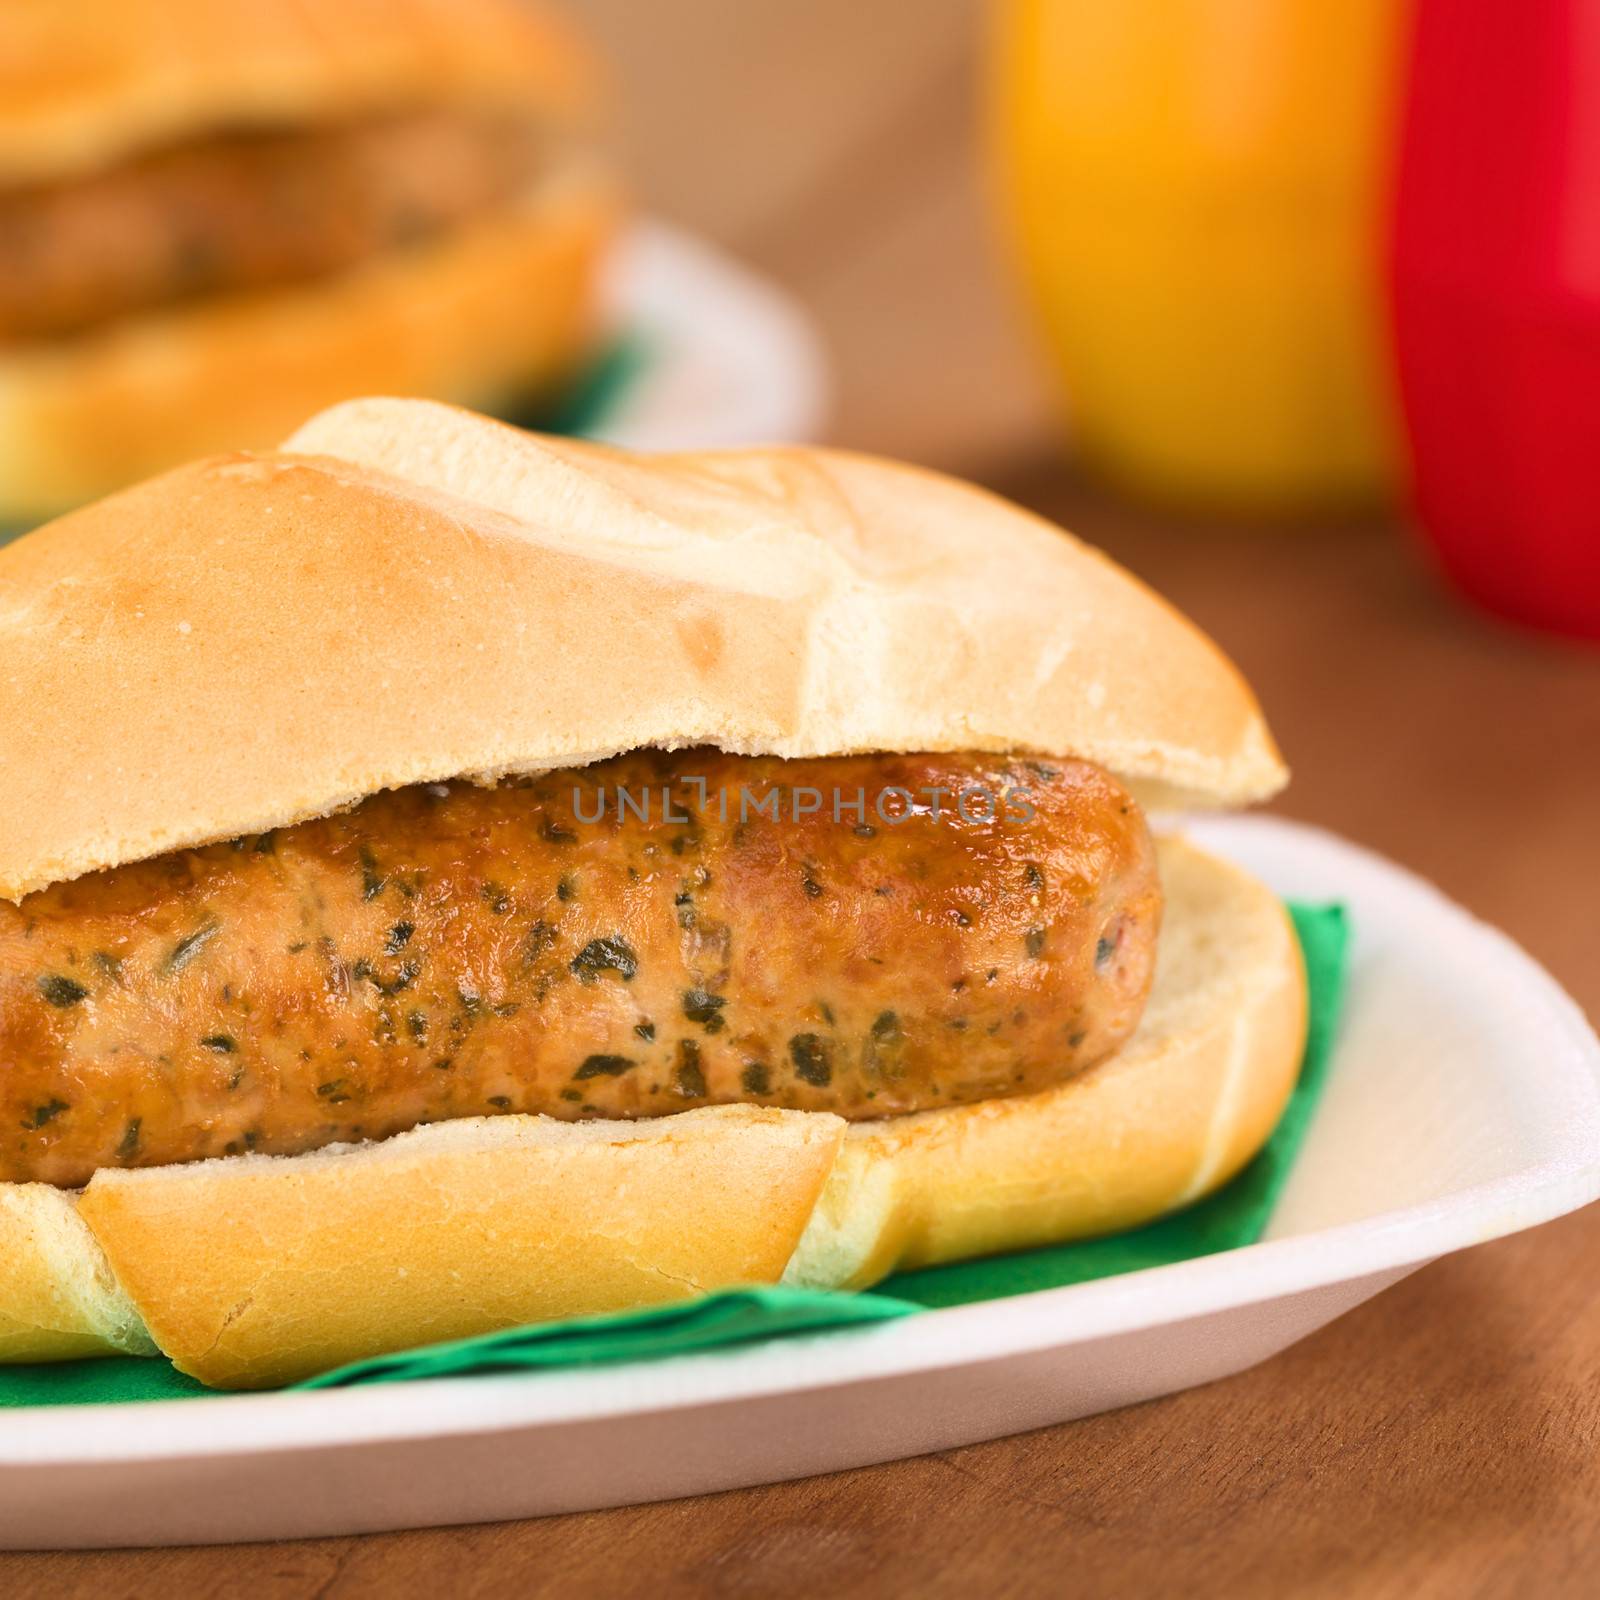 Fried bratwurst in bun, traditional German fast food served on disposable plate with napkin, ketchup and mustard in the back (Selective Focus, Focus on the front of the bratwurst)